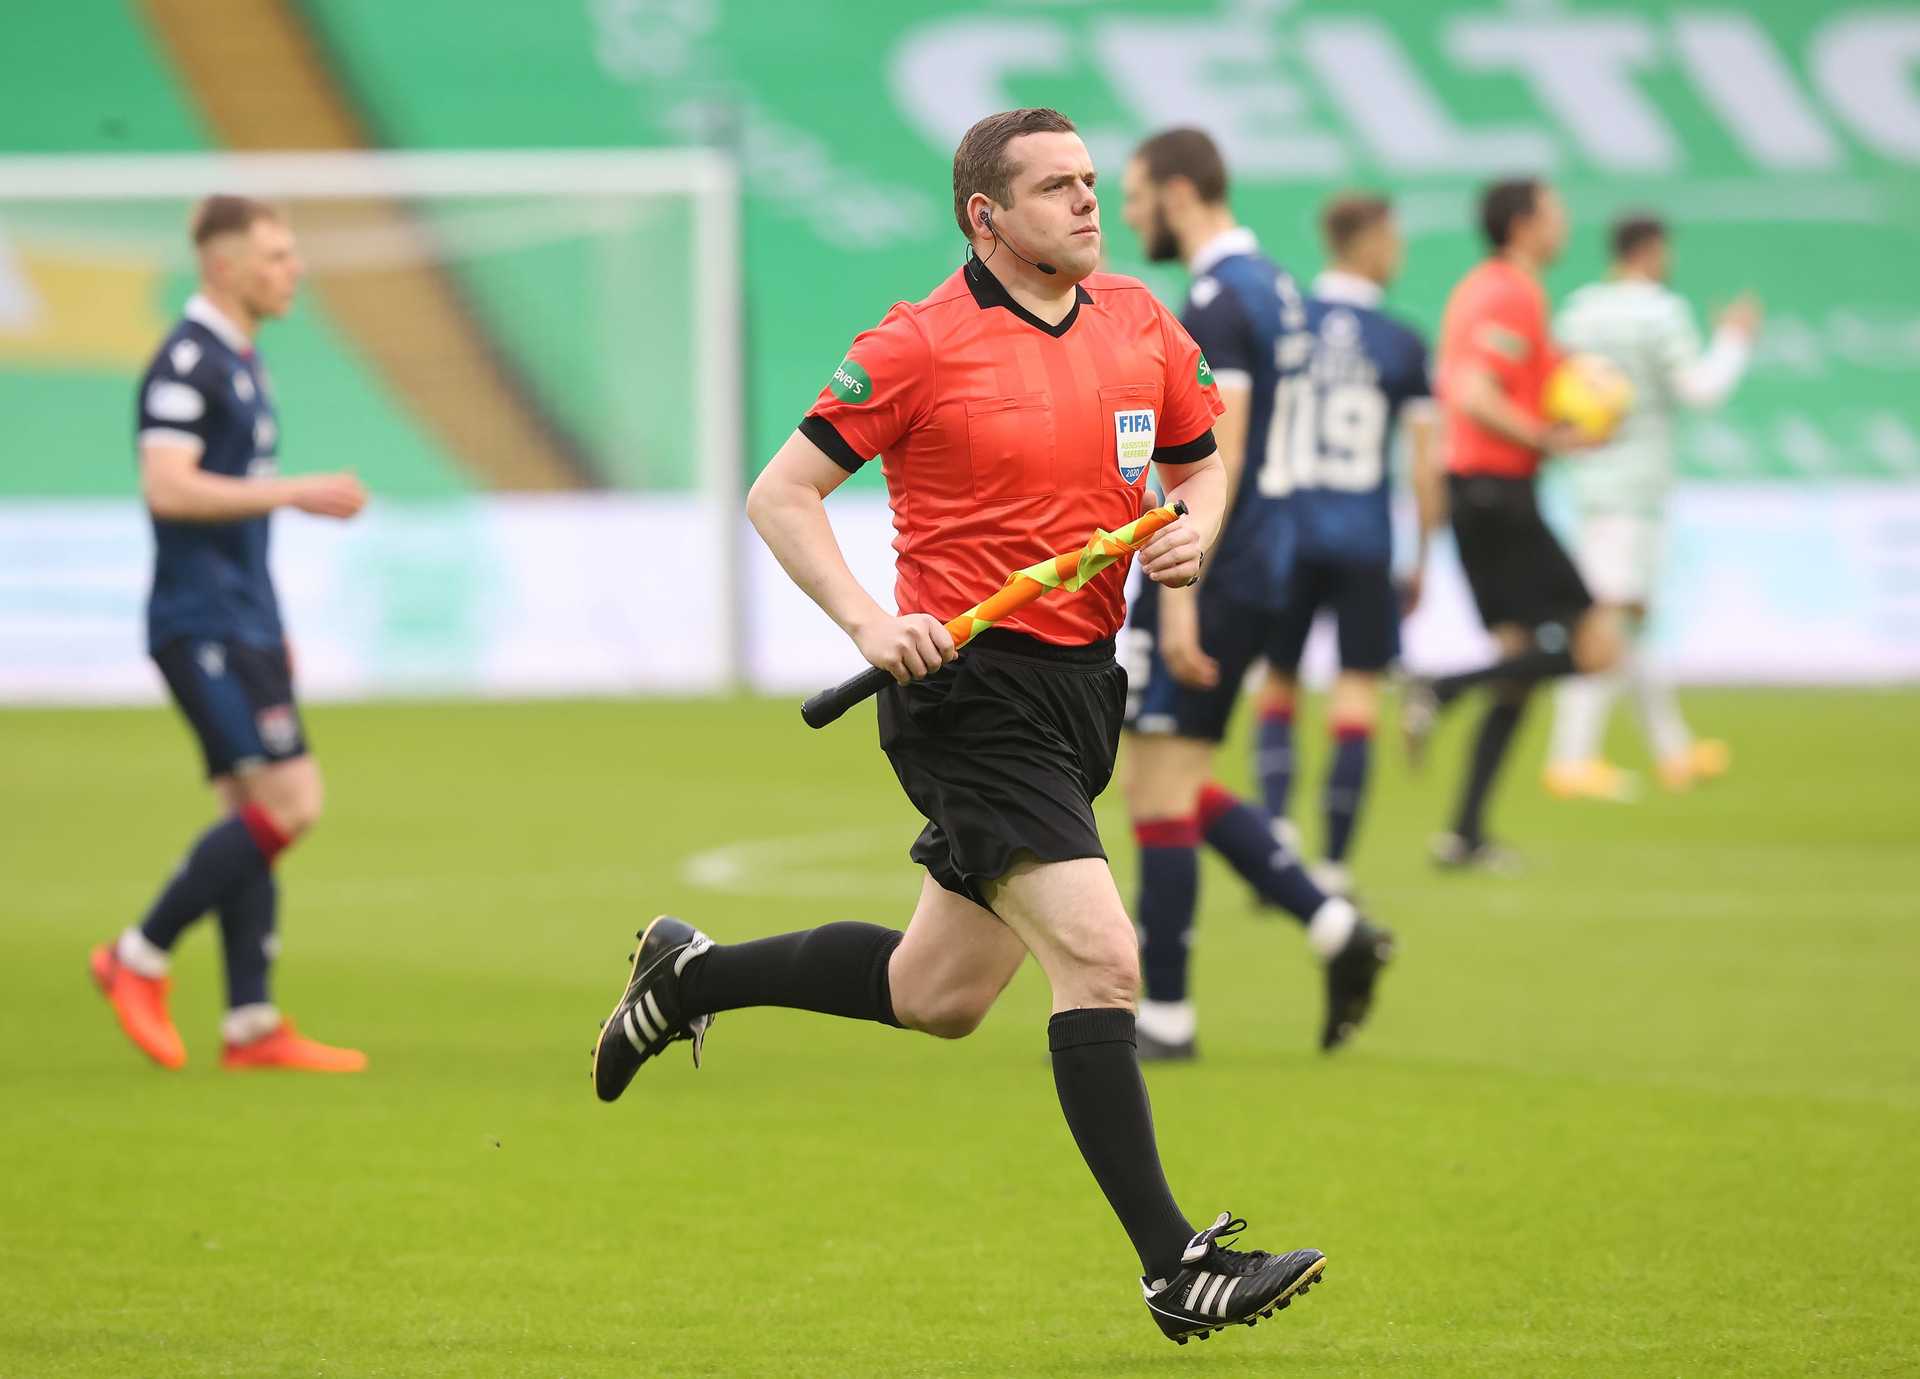 Douglas Ross was also facing questions about his role as a linesman and his use of expenses